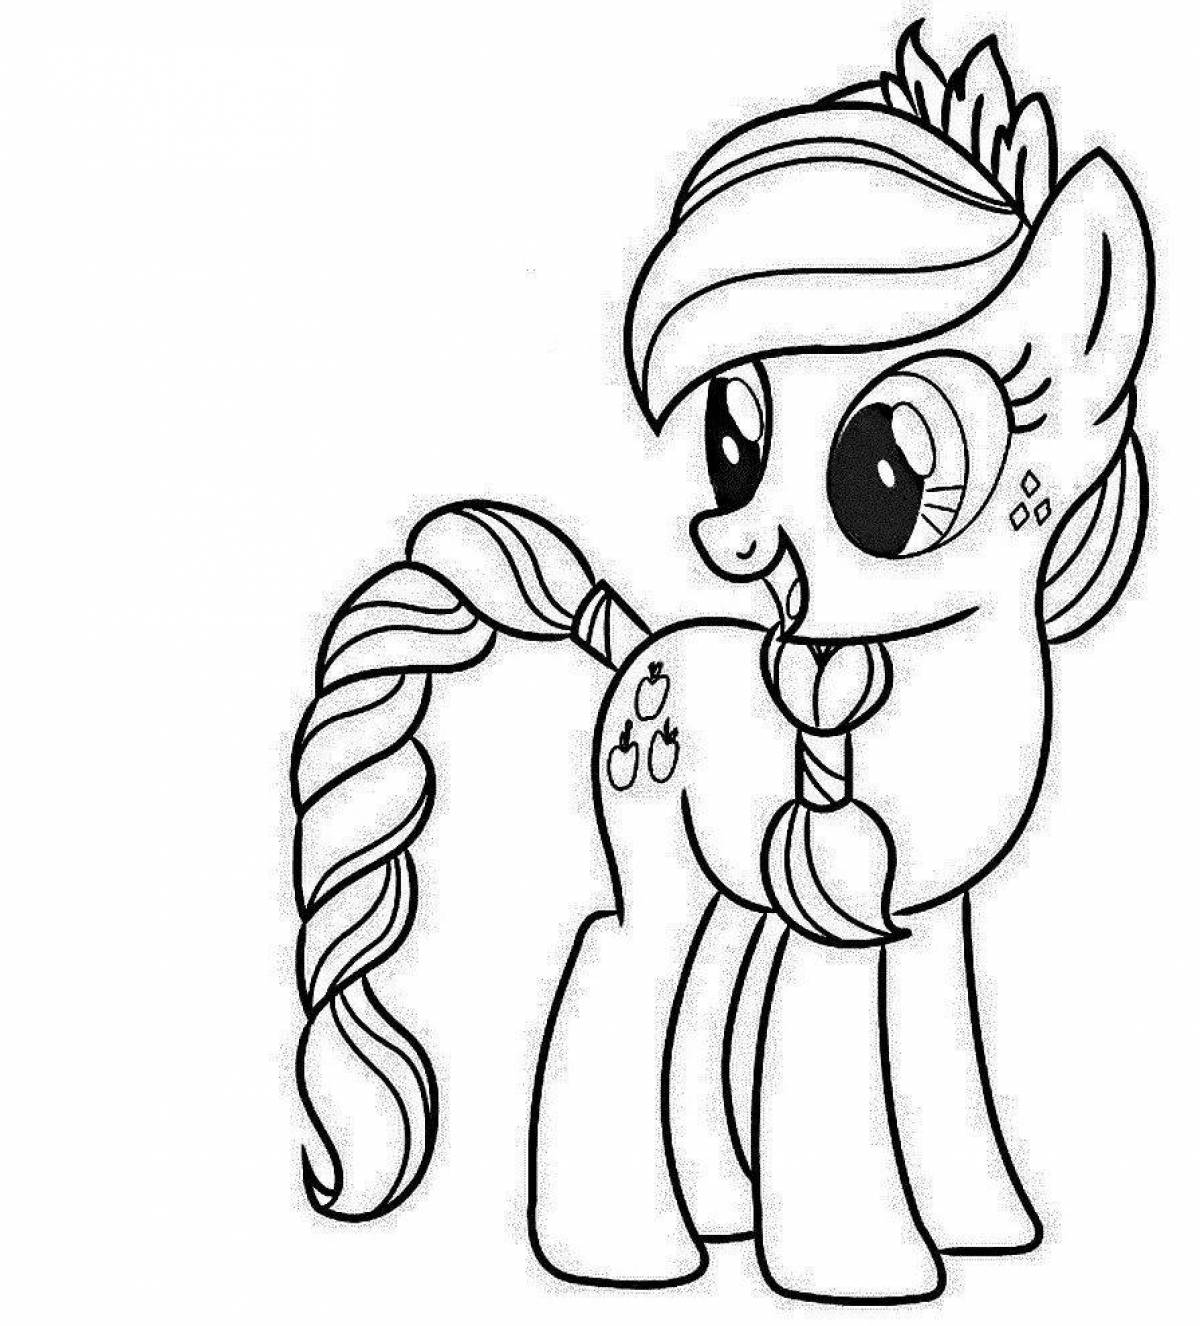 Coloring page adorable little pony